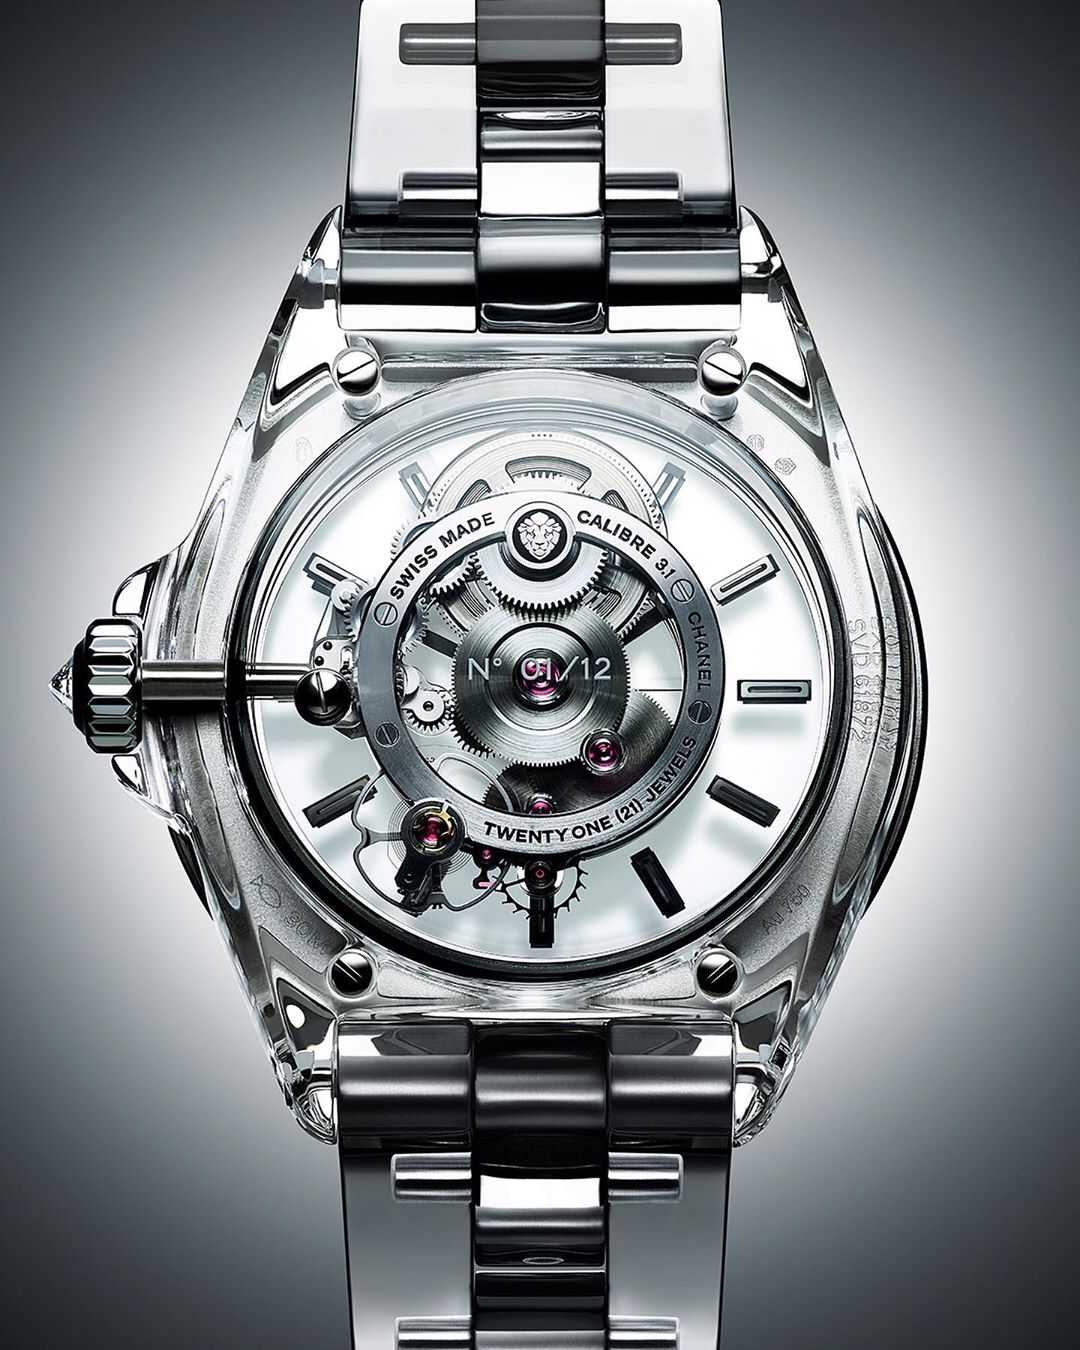 CHANEL - J12 X-RAY
The J12 watch reveals its lines to show off the new Caliber 3.1 movement, featuring a mounting plate and bridges made of sapphire crystal, designed and assembled by the CHANEL Manuf...